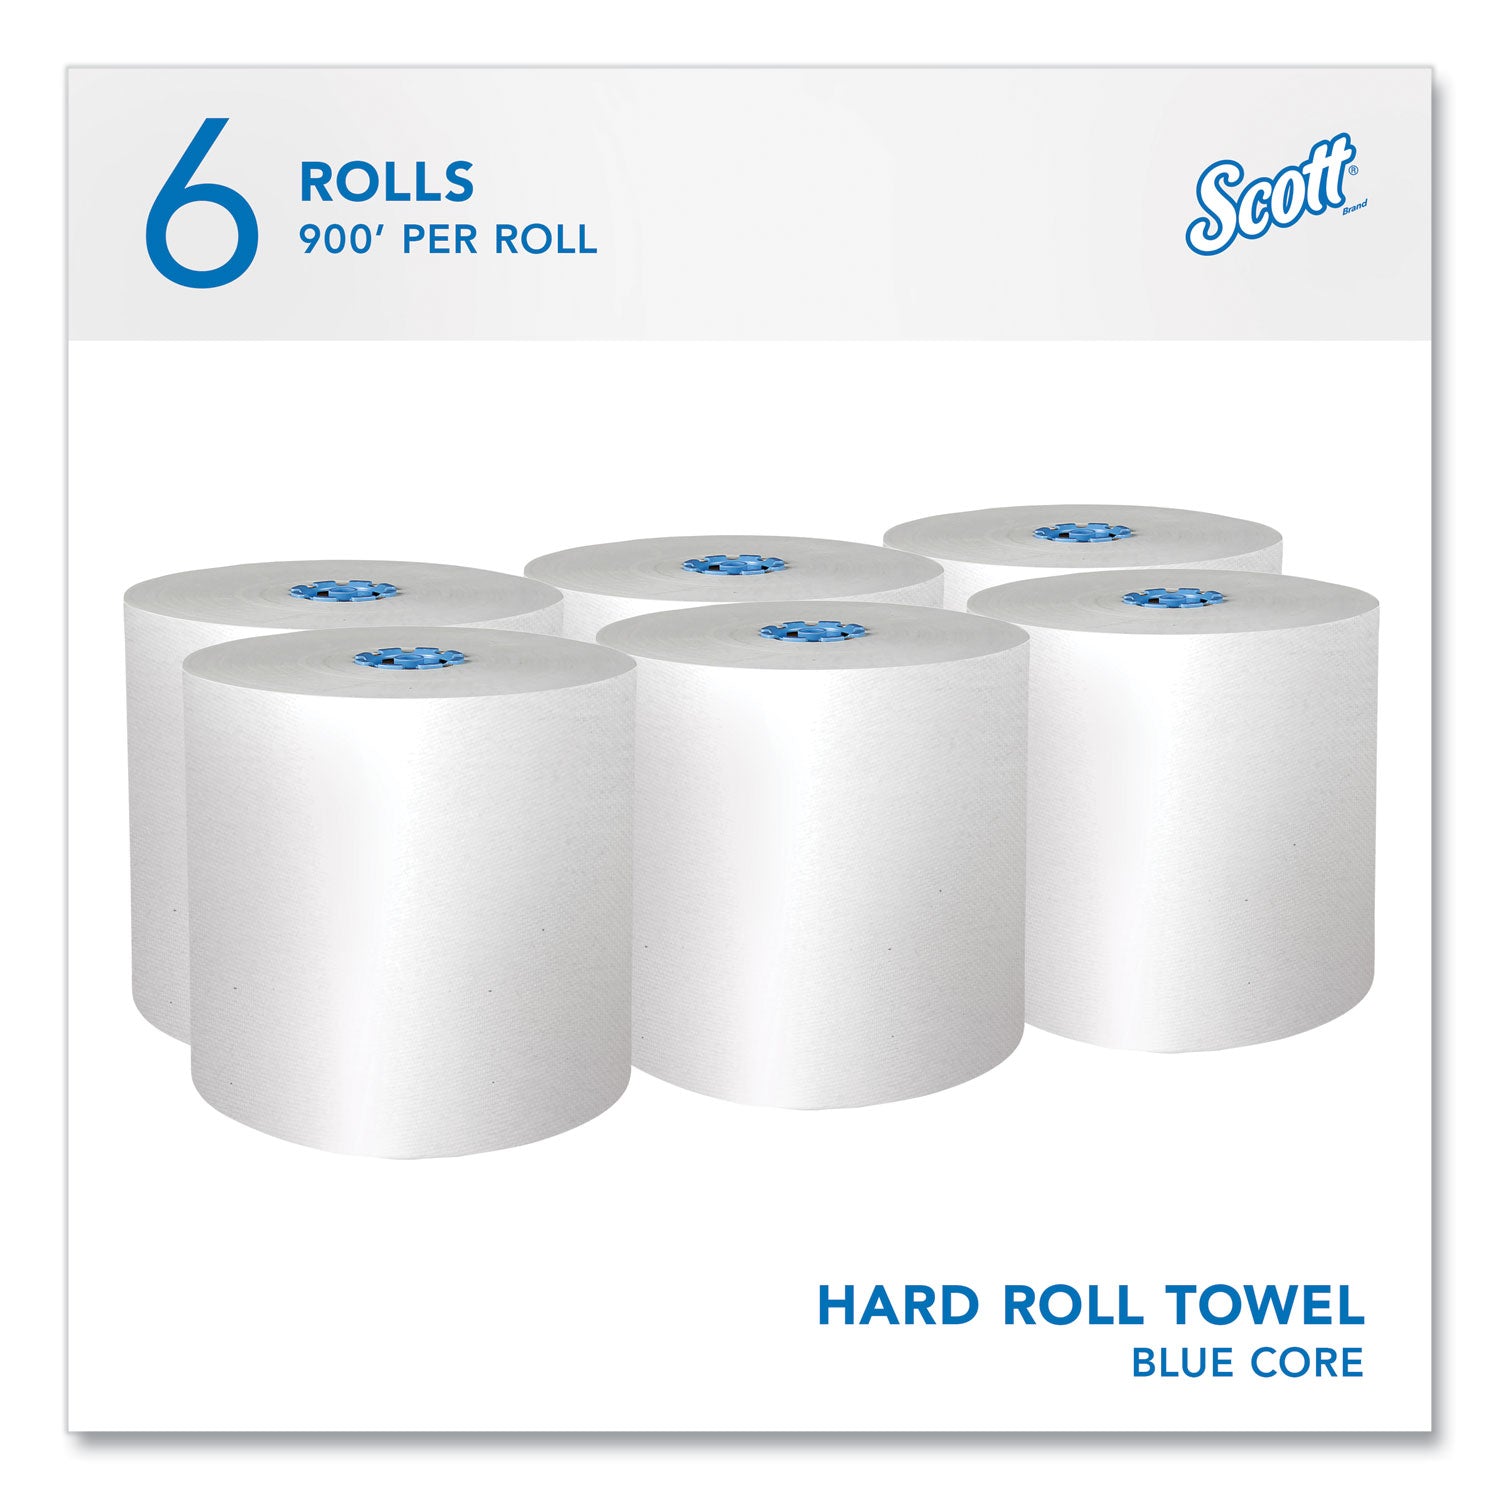 pro-hard-roll-paper-towels-with-absorbency-pockets-for-scott-pro-dispenser-blue-core-only-1-ply-75-x-900-ft-6-rolls-ct_kcc43959 - 2